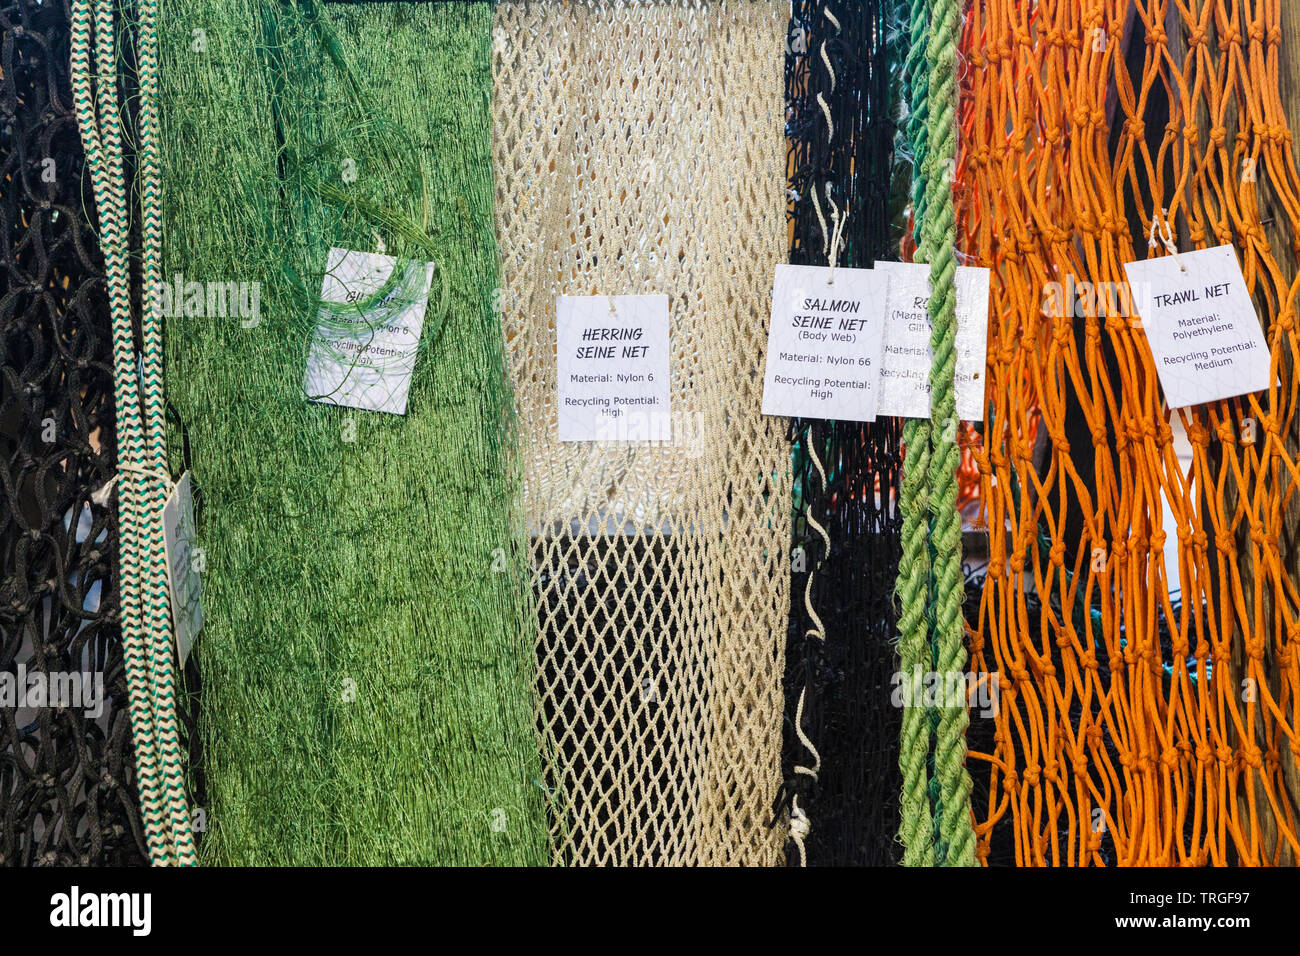 Abstract image of several styles of fishing nets on display at the heritage Britannia Ship Yard in Steveston British Columbia Canada Stock Photo